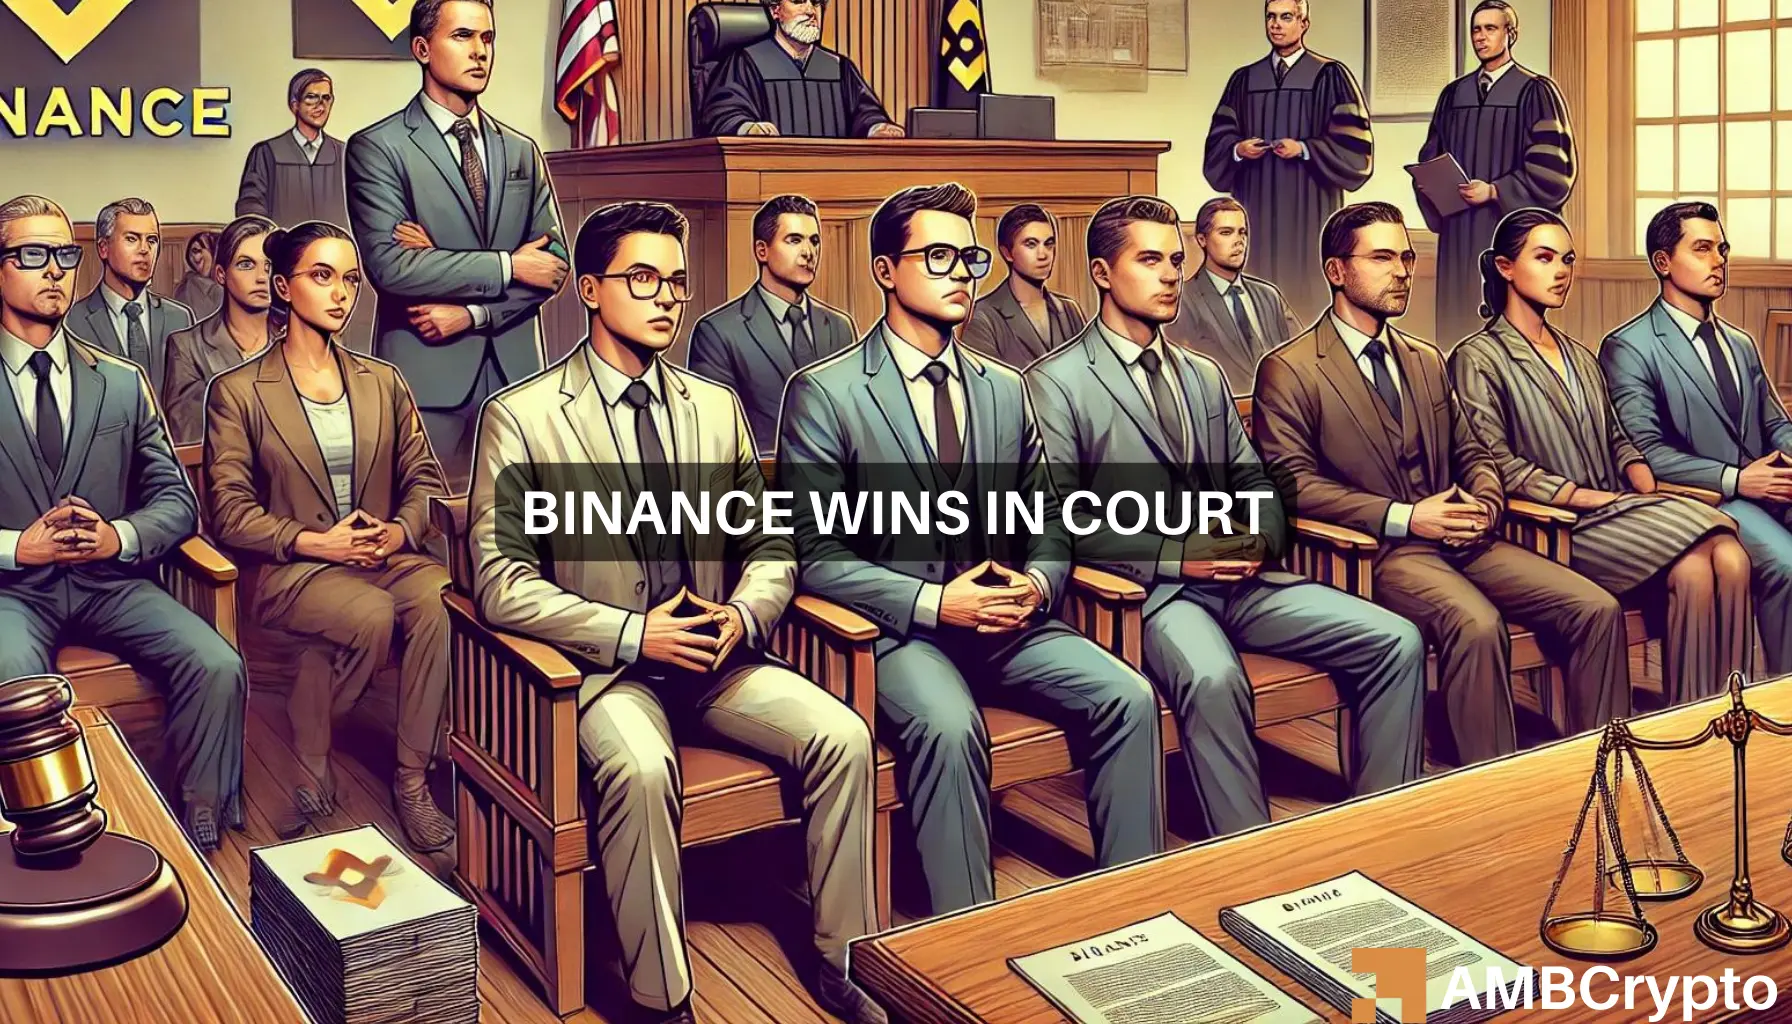 Binance notches a ‘win’ after court approves T-bill investment plans